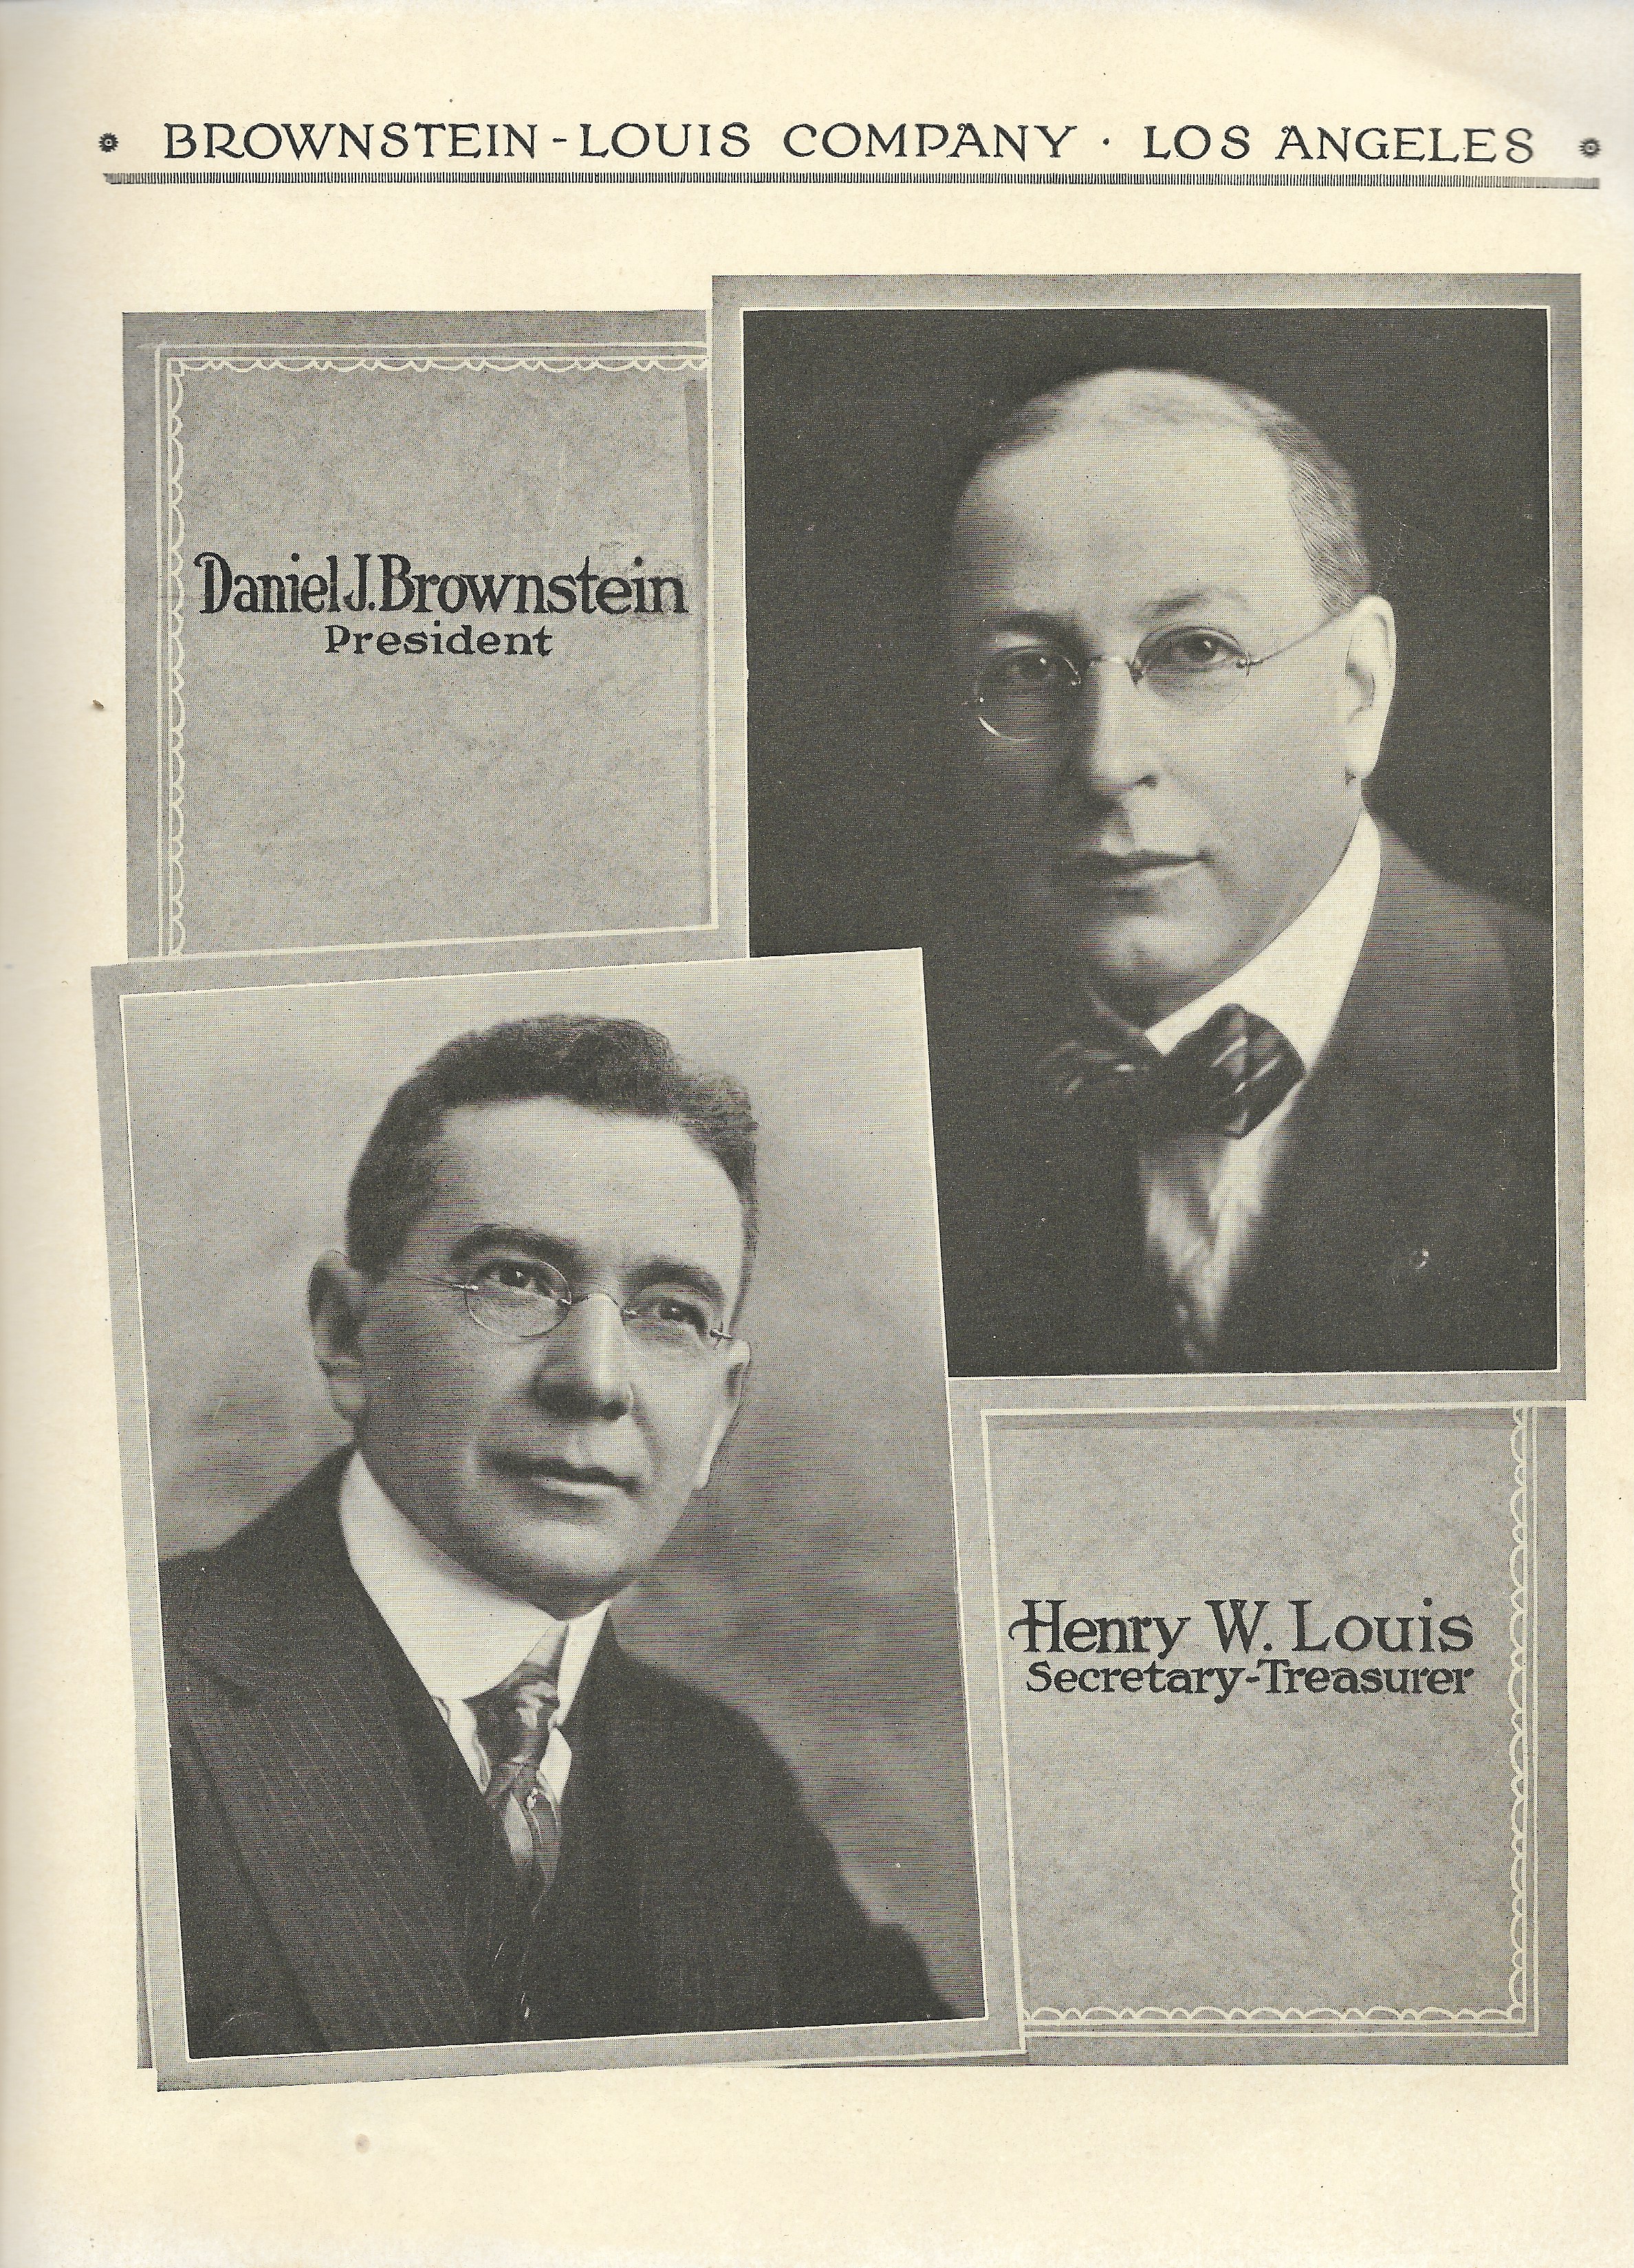 The Brownstein-Louis Company Catalog of 1918: Men’s Furnishing Goods in Los Angeles – JMAW ...